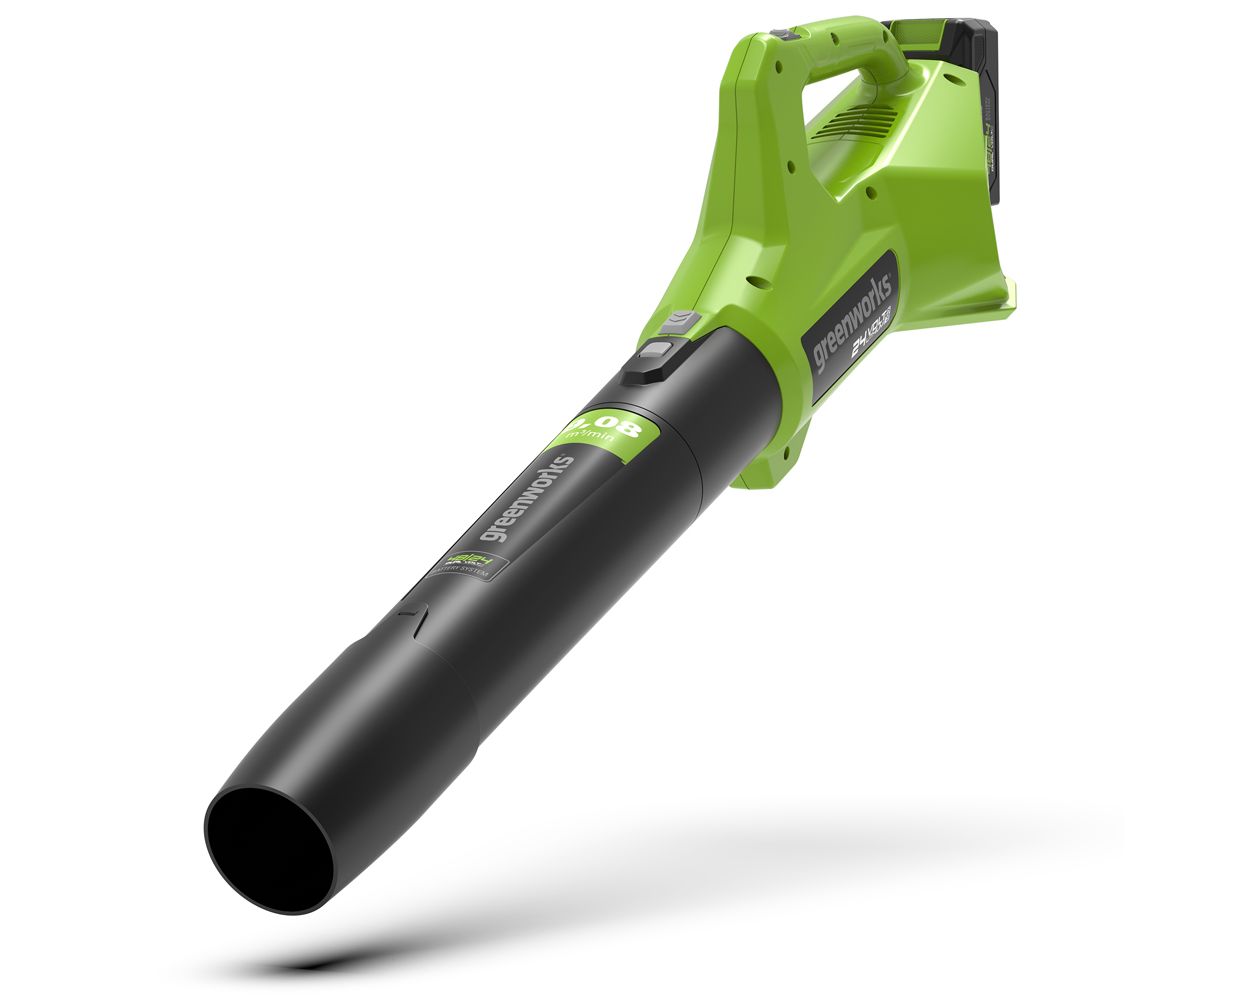 GreenWorks G24AB 24V Cordless Axial Blower (Bare Tool)